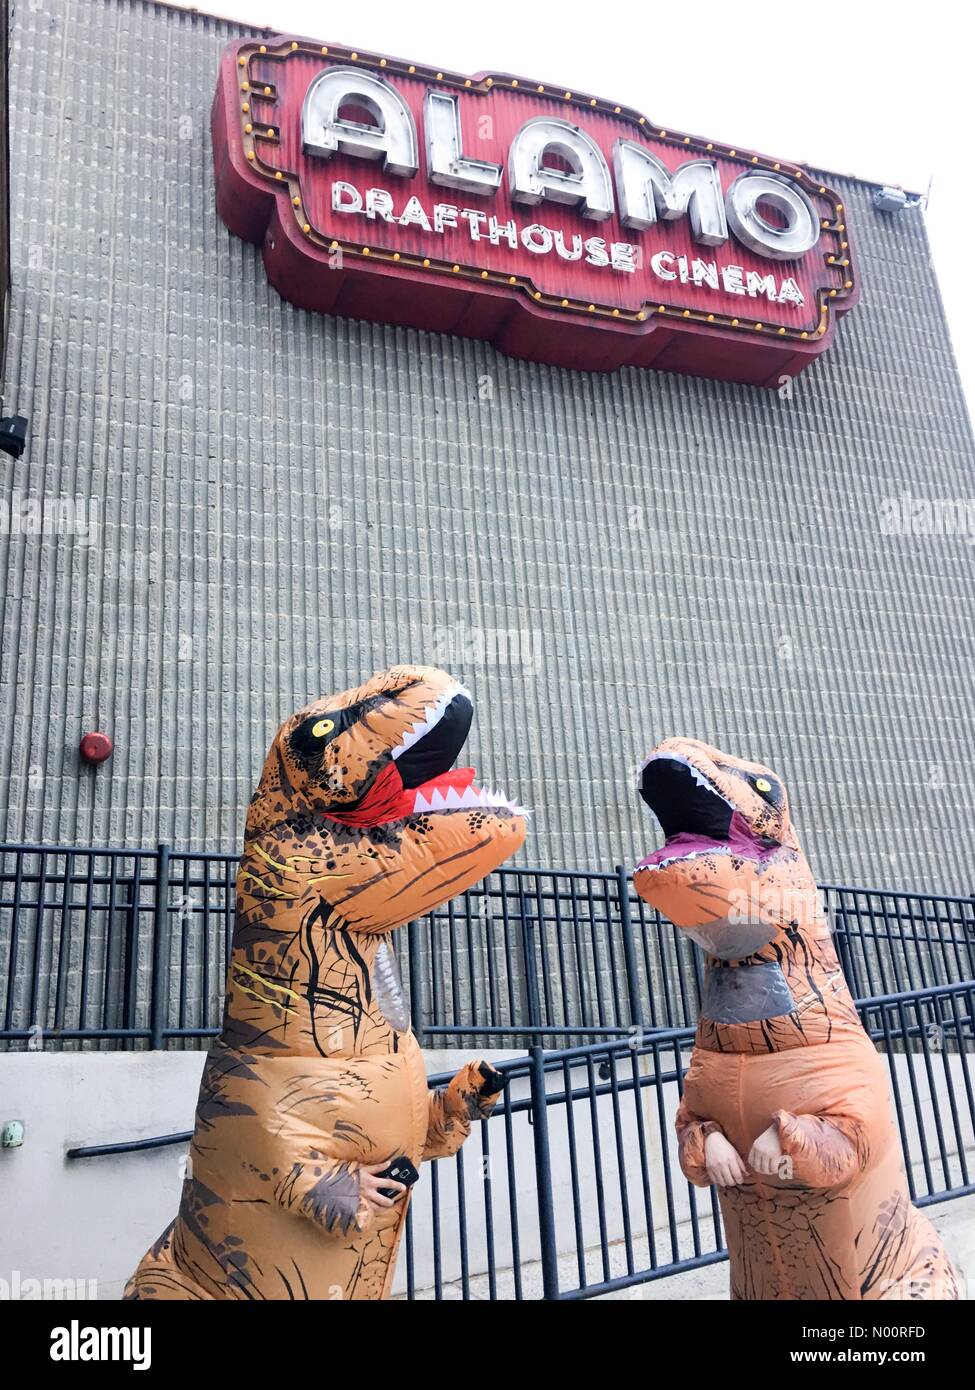 Yonkers, New York, USA. 23rd June, 2018. Yonkers NY - 23 July 2018: Dinosaurs outside the Alamo Drafthouse Cinema for the opening weekend of Jurassic World: Fallen Kingdom. Credit: Marianne A. Campolongo/StockimoNews/Alamy Live News Stock Photo